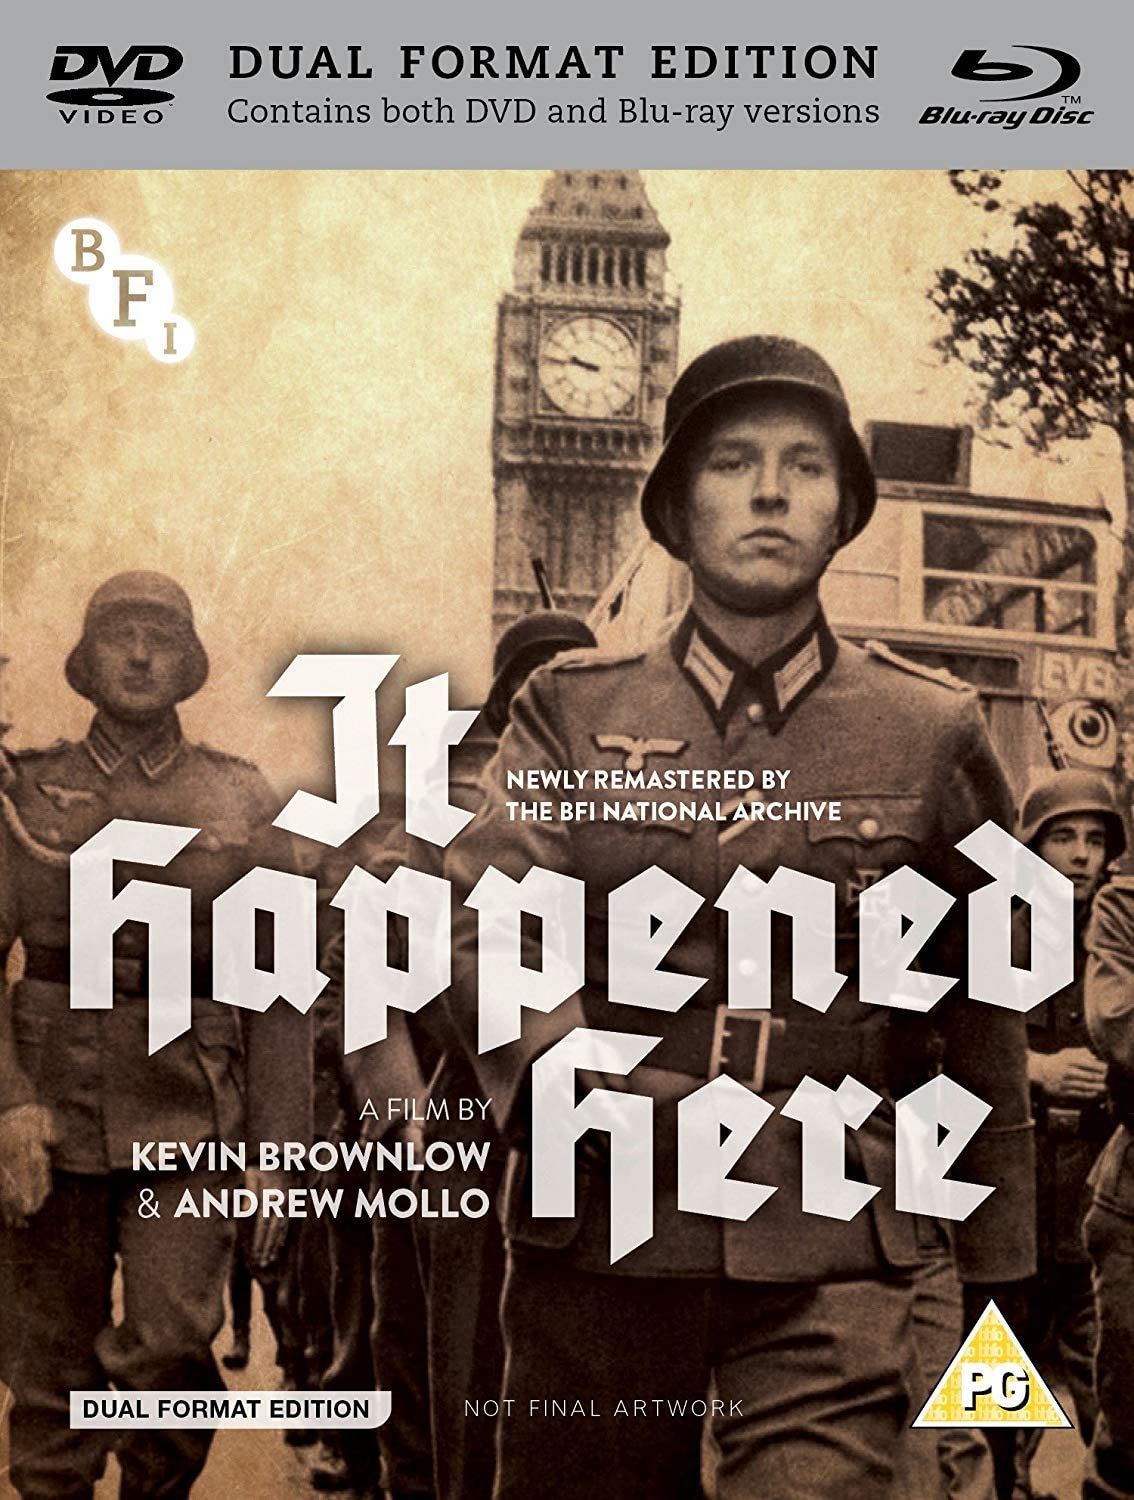 It Happened Here (DVD + Blu-ray Disk) | Kevin Brownlow, Andrew Mollo